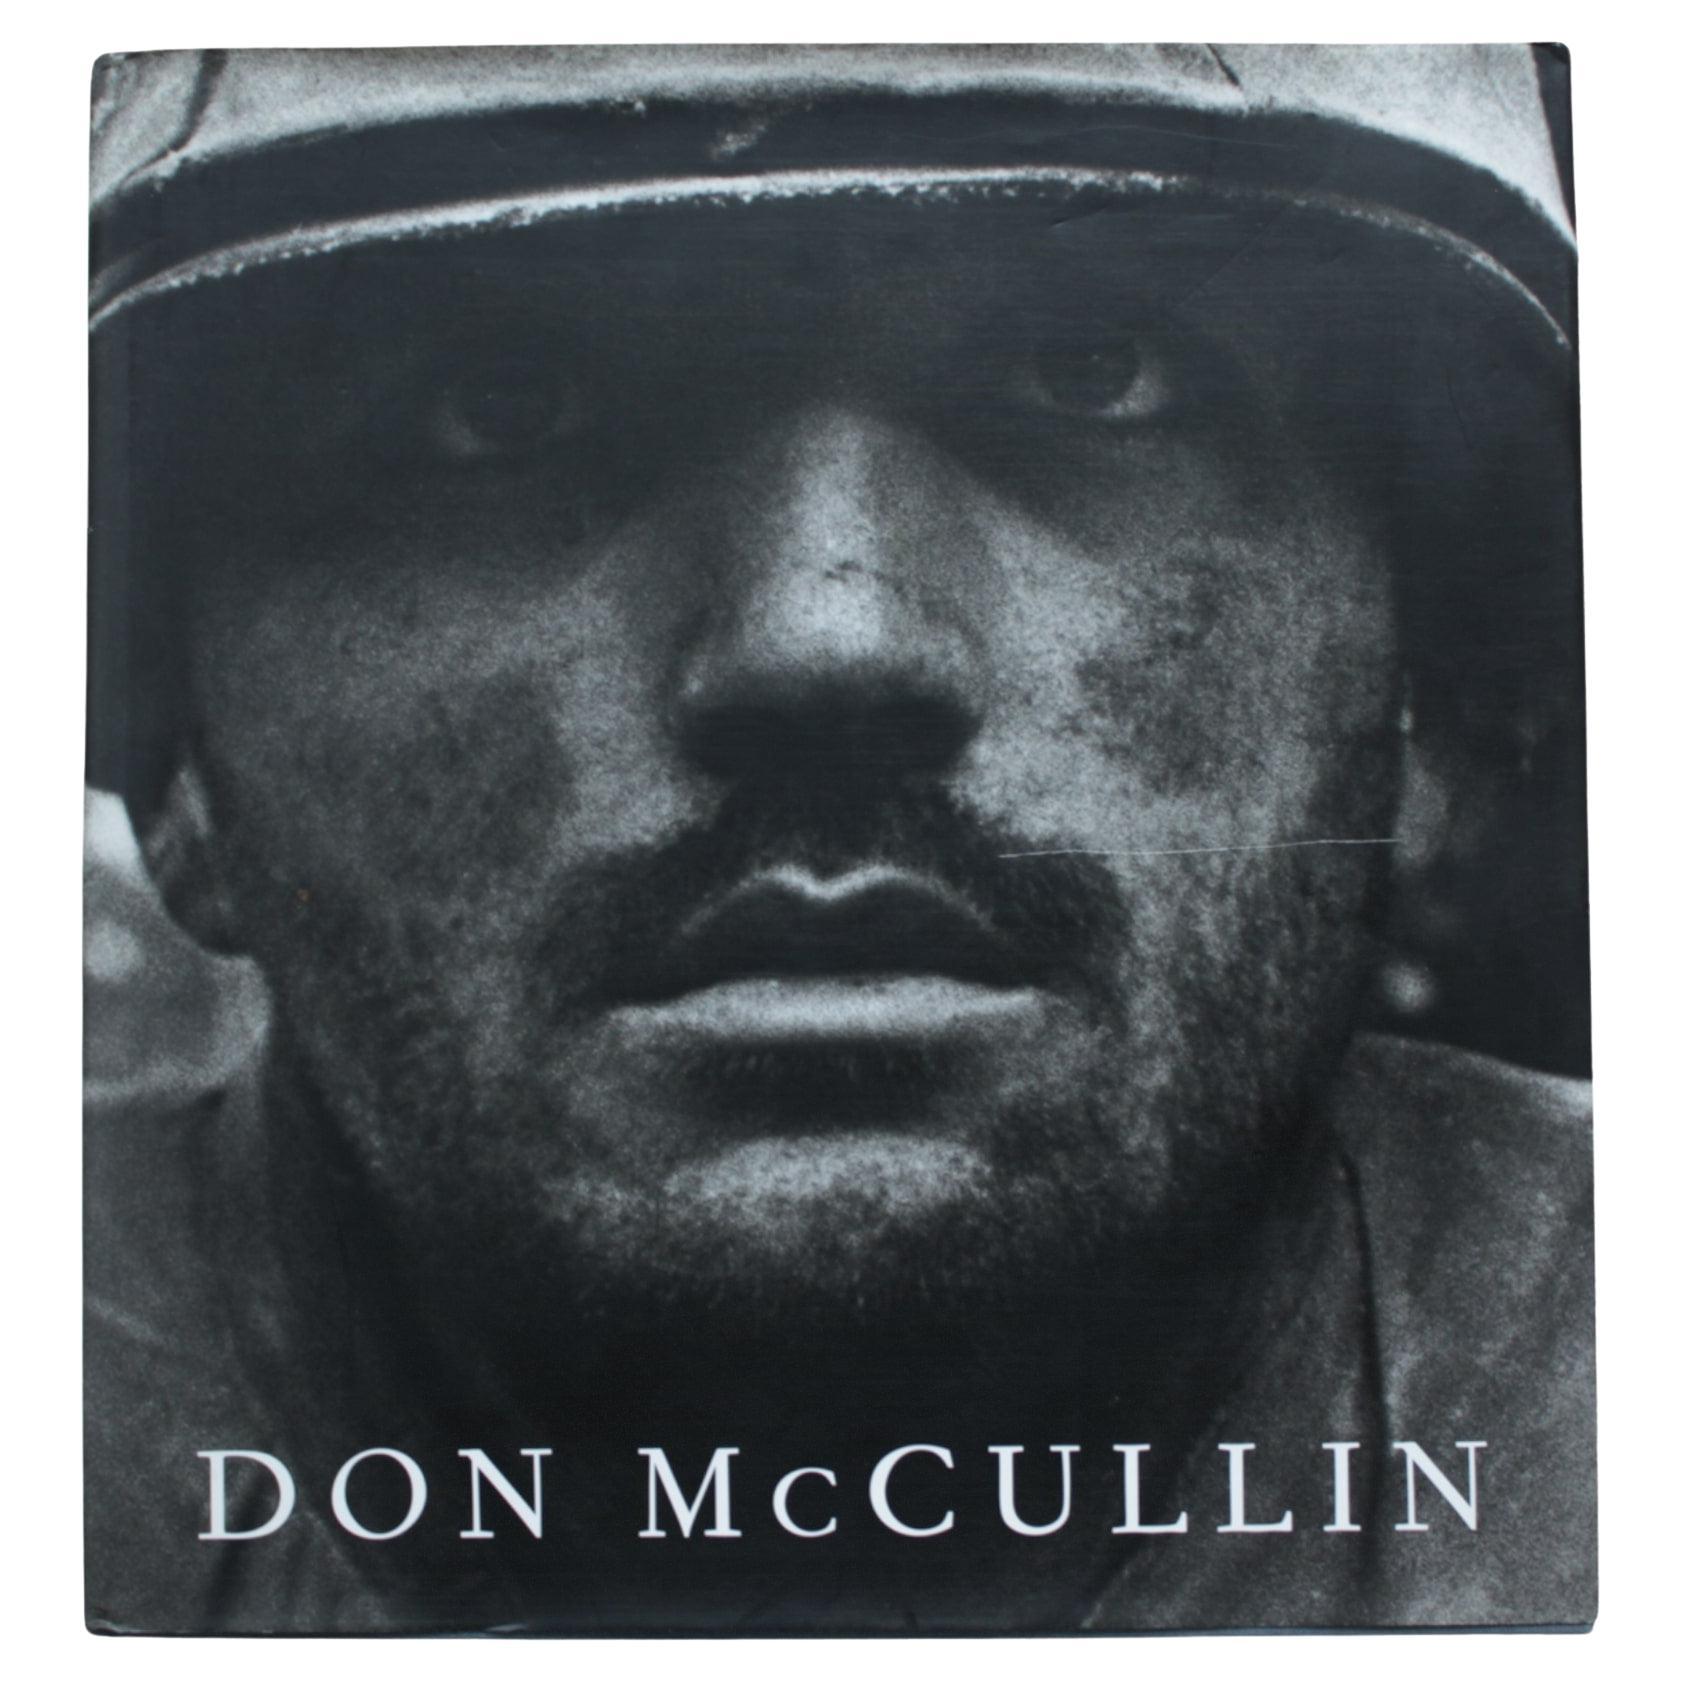 Don McCullin, First Edition, Hardcover, 2001 , Art Photography Book For Sale